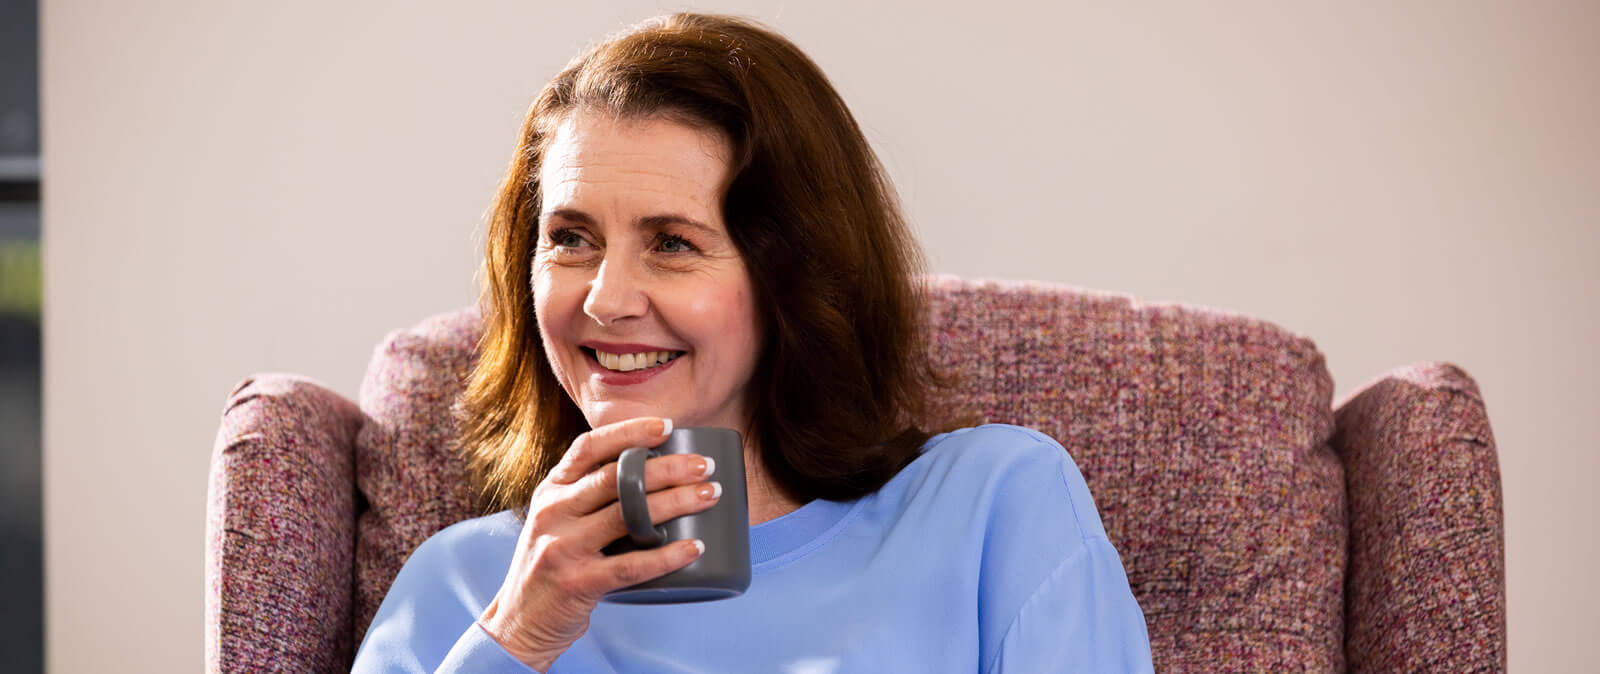 A middle-aged woman with brown hair, wearing a light blue jumper and holding a grey cup in her hand, with a friendly expression on her face.